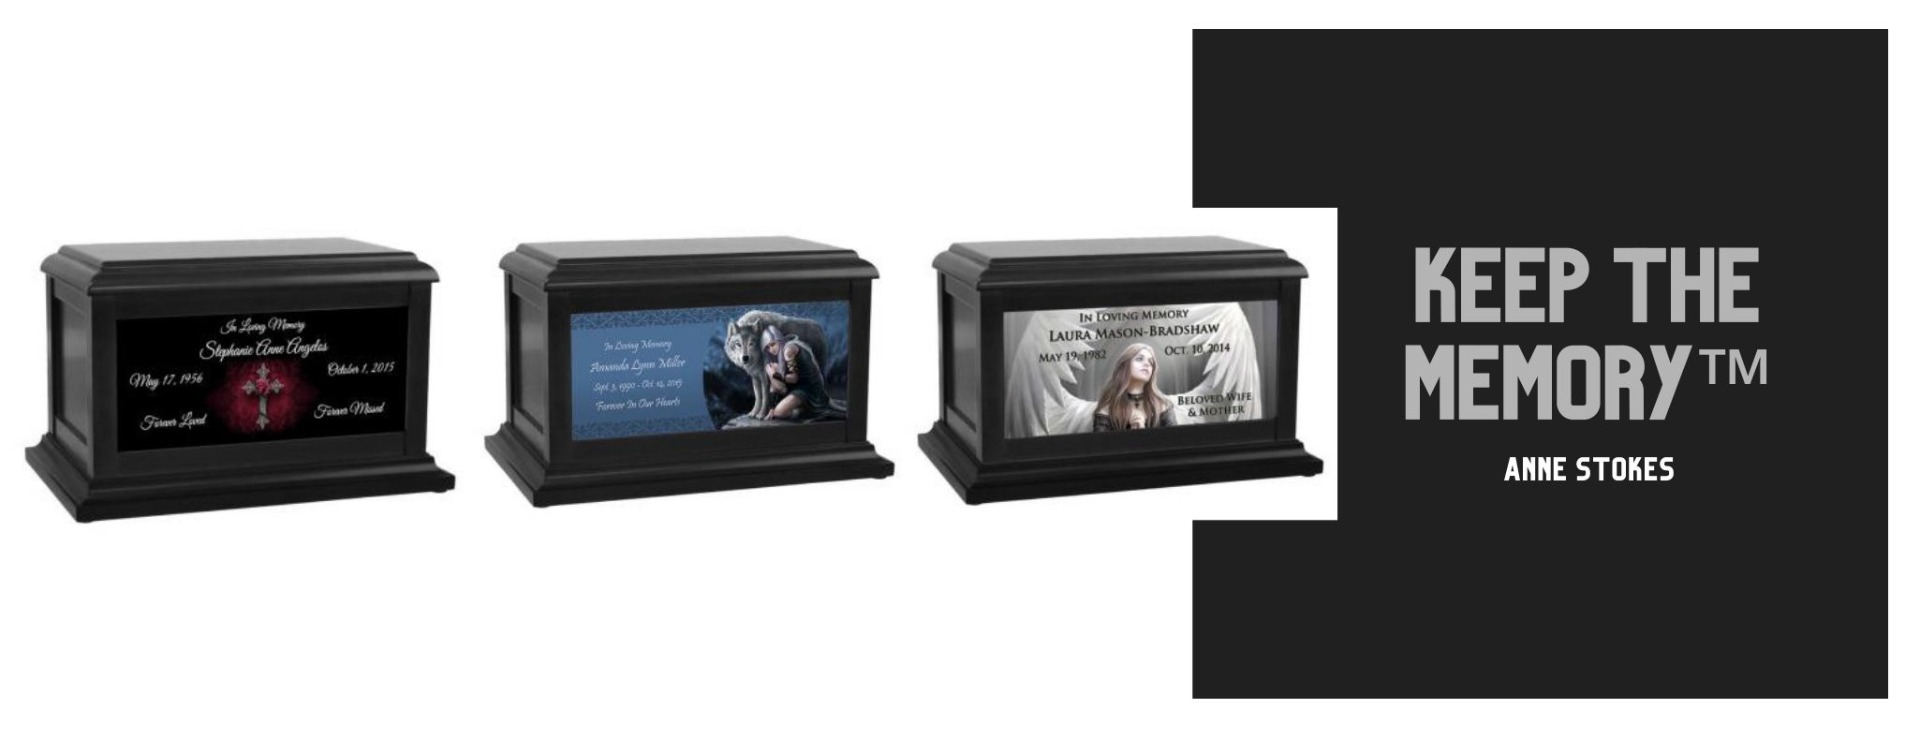 Anne Stokes Keep The Memory Urns.